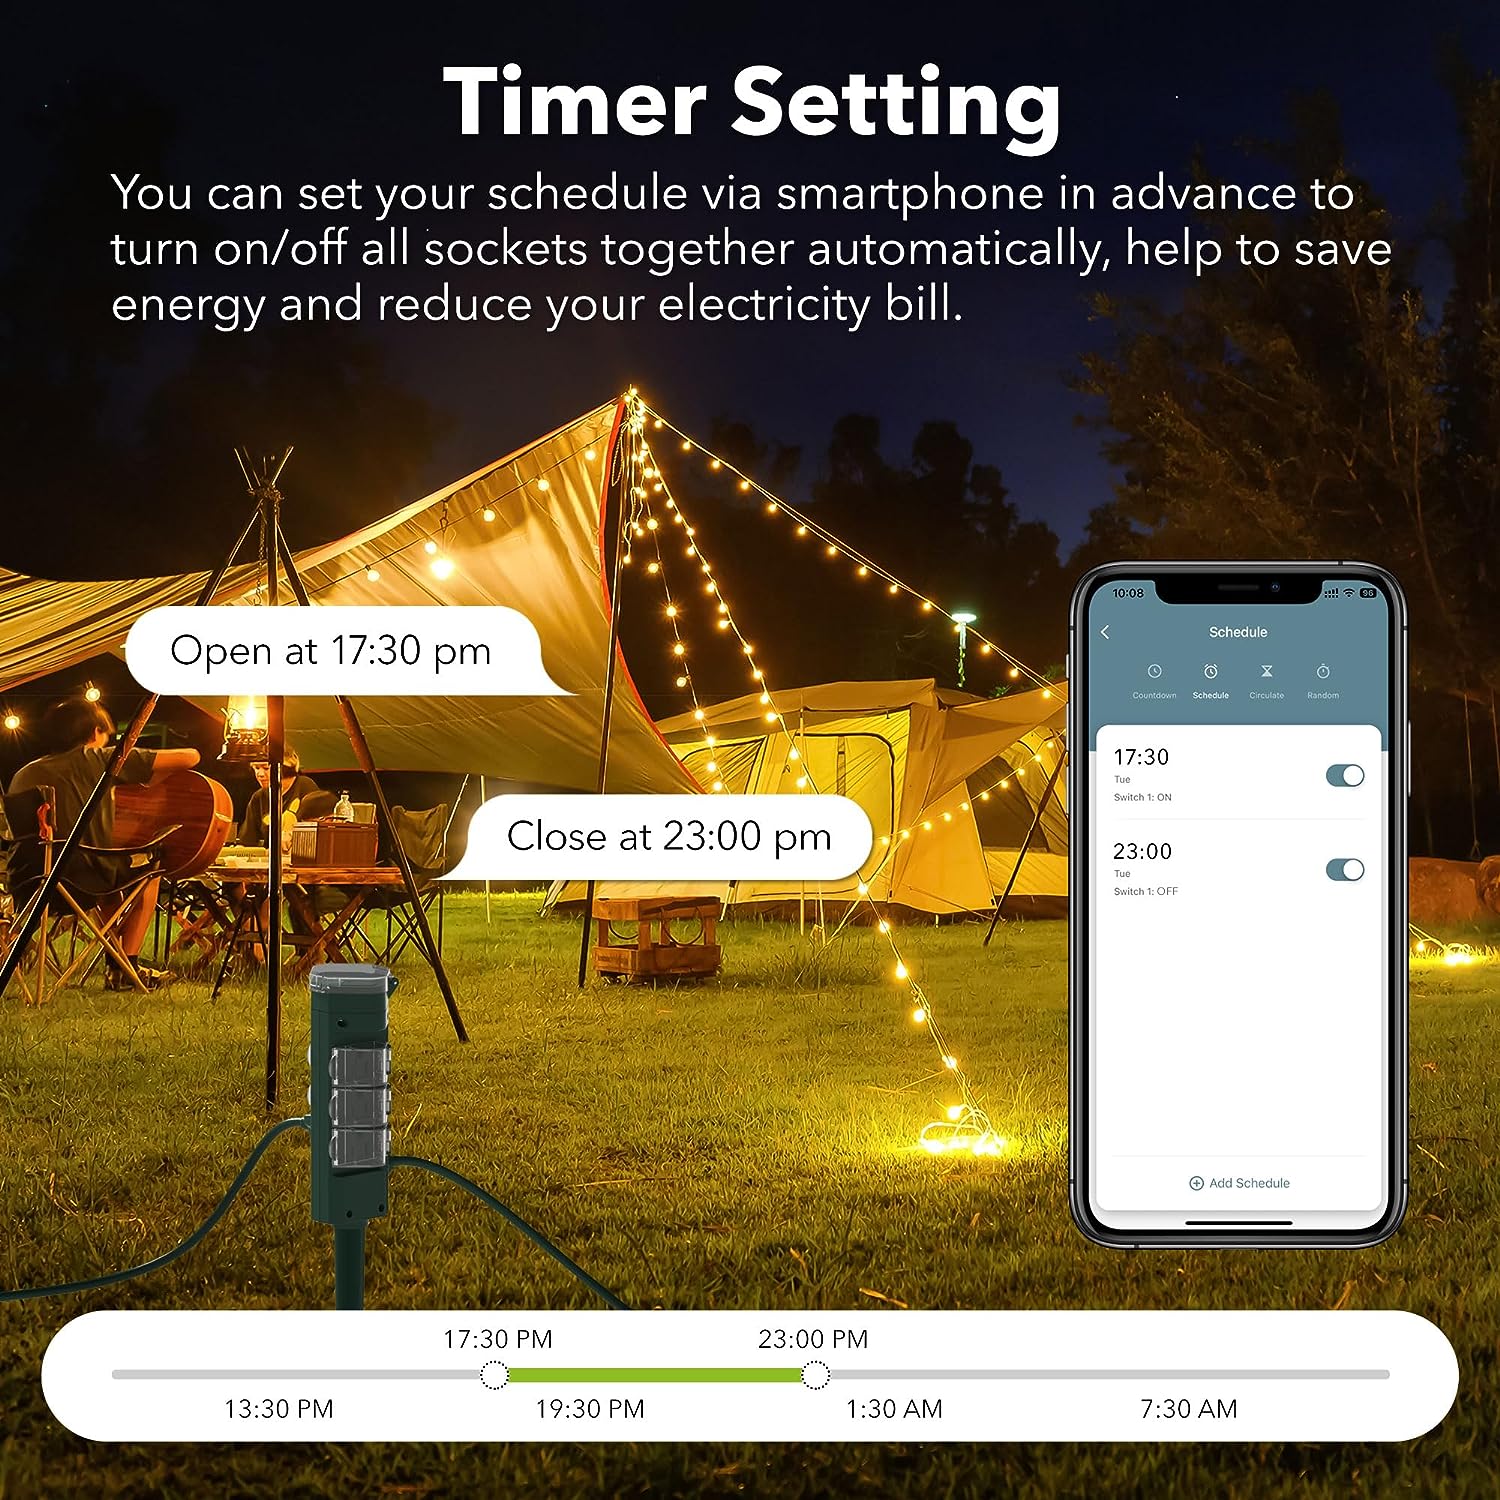 Six Outlet Outdoor Stake Wi-Fi Smart Plug